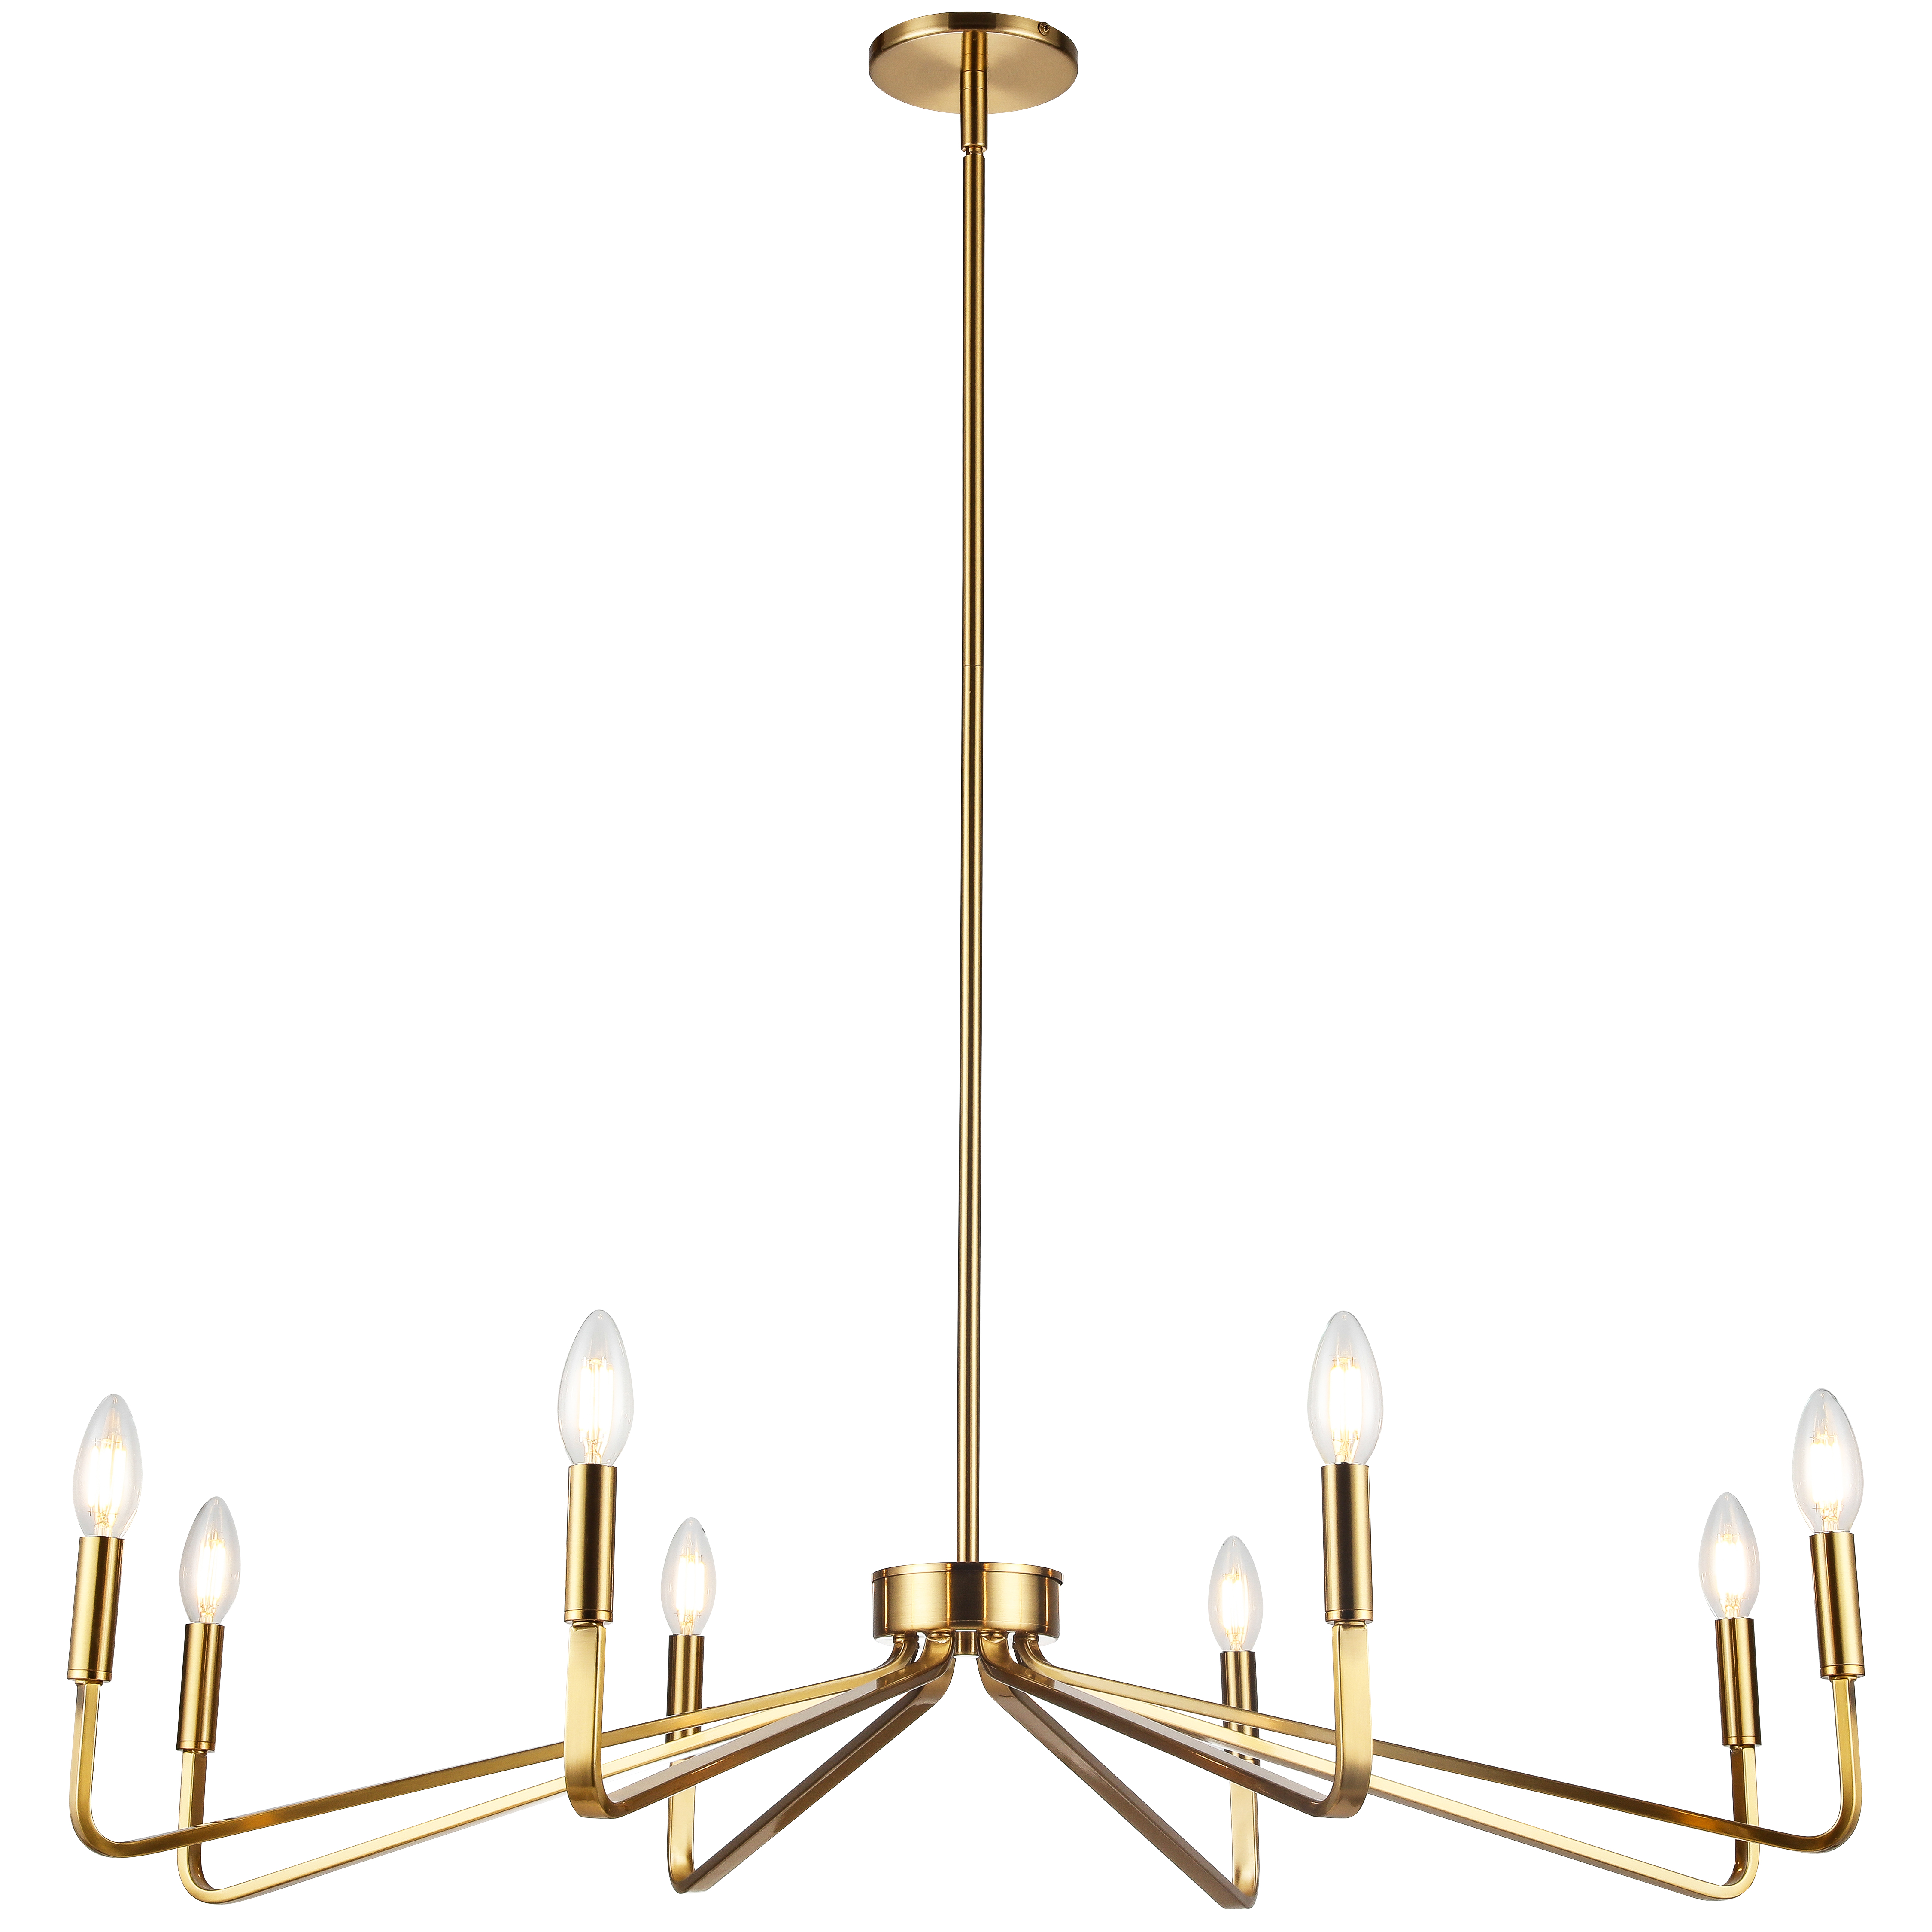 The traditional chandelier design gets a thoroughly modern makeover in the Clayton family of lighting. Straight lines and gleaming metal make a definitive statement in cutting edge glamour.  A metal drop and frame comes in a choice of finish, contrasting or complementing white incandescent bulbs in the traditional candle shape. The frame places the bulbs in a symmetrical, one-sided pattern perfect for placement against a wall.  It's a look that complements a fashionable dining room, kitchen, or even a hallway.